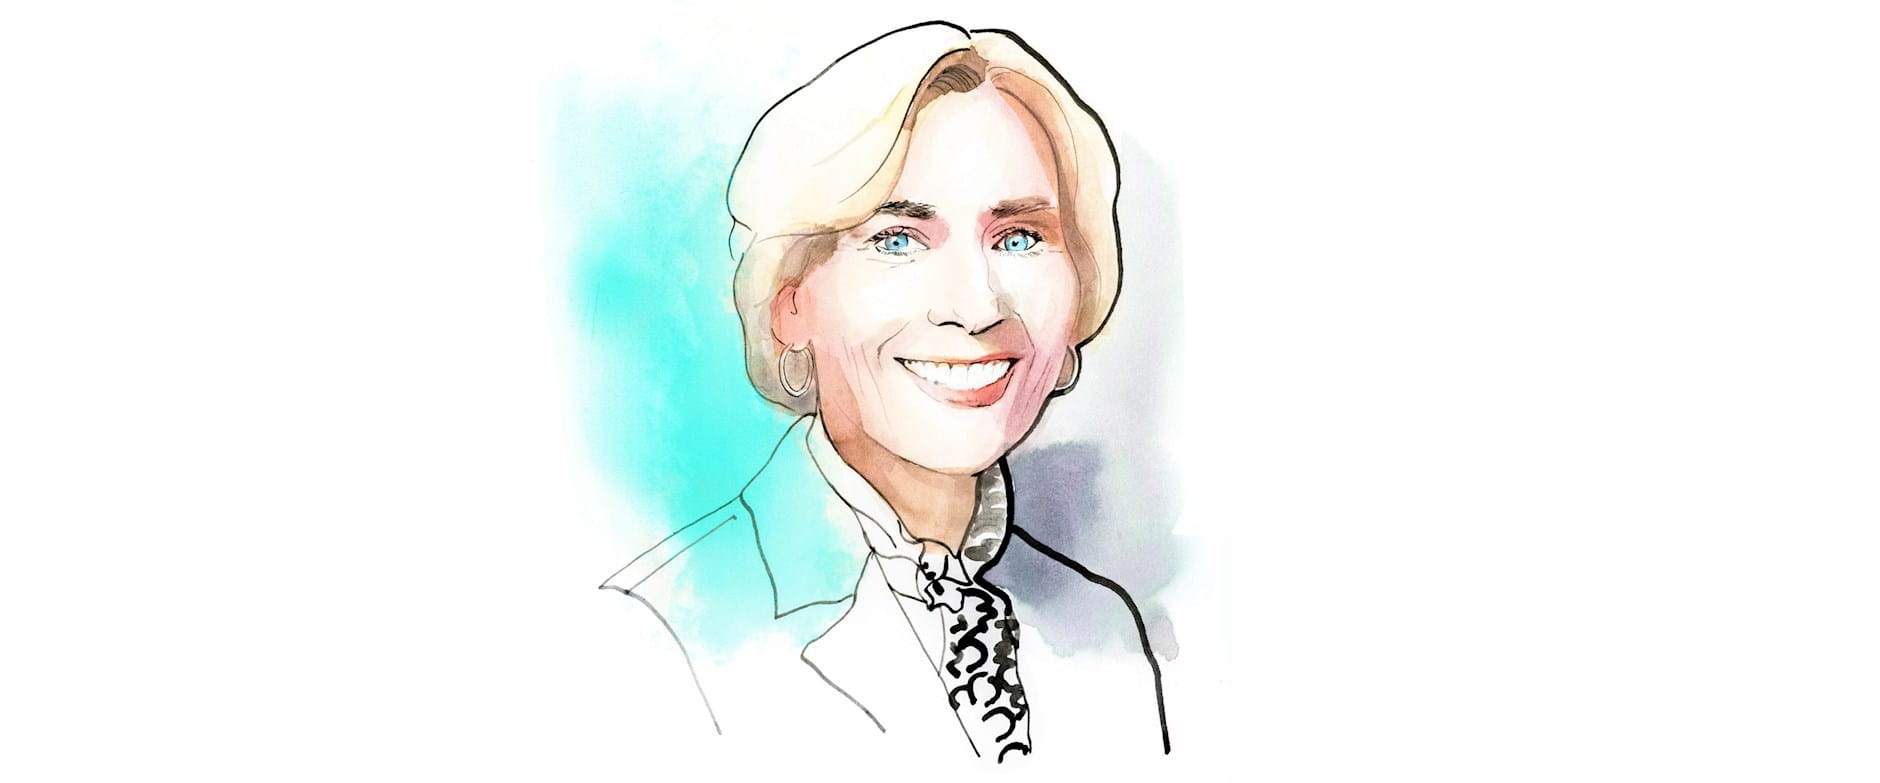 A watercolor style portrait of Kathryn Mikells